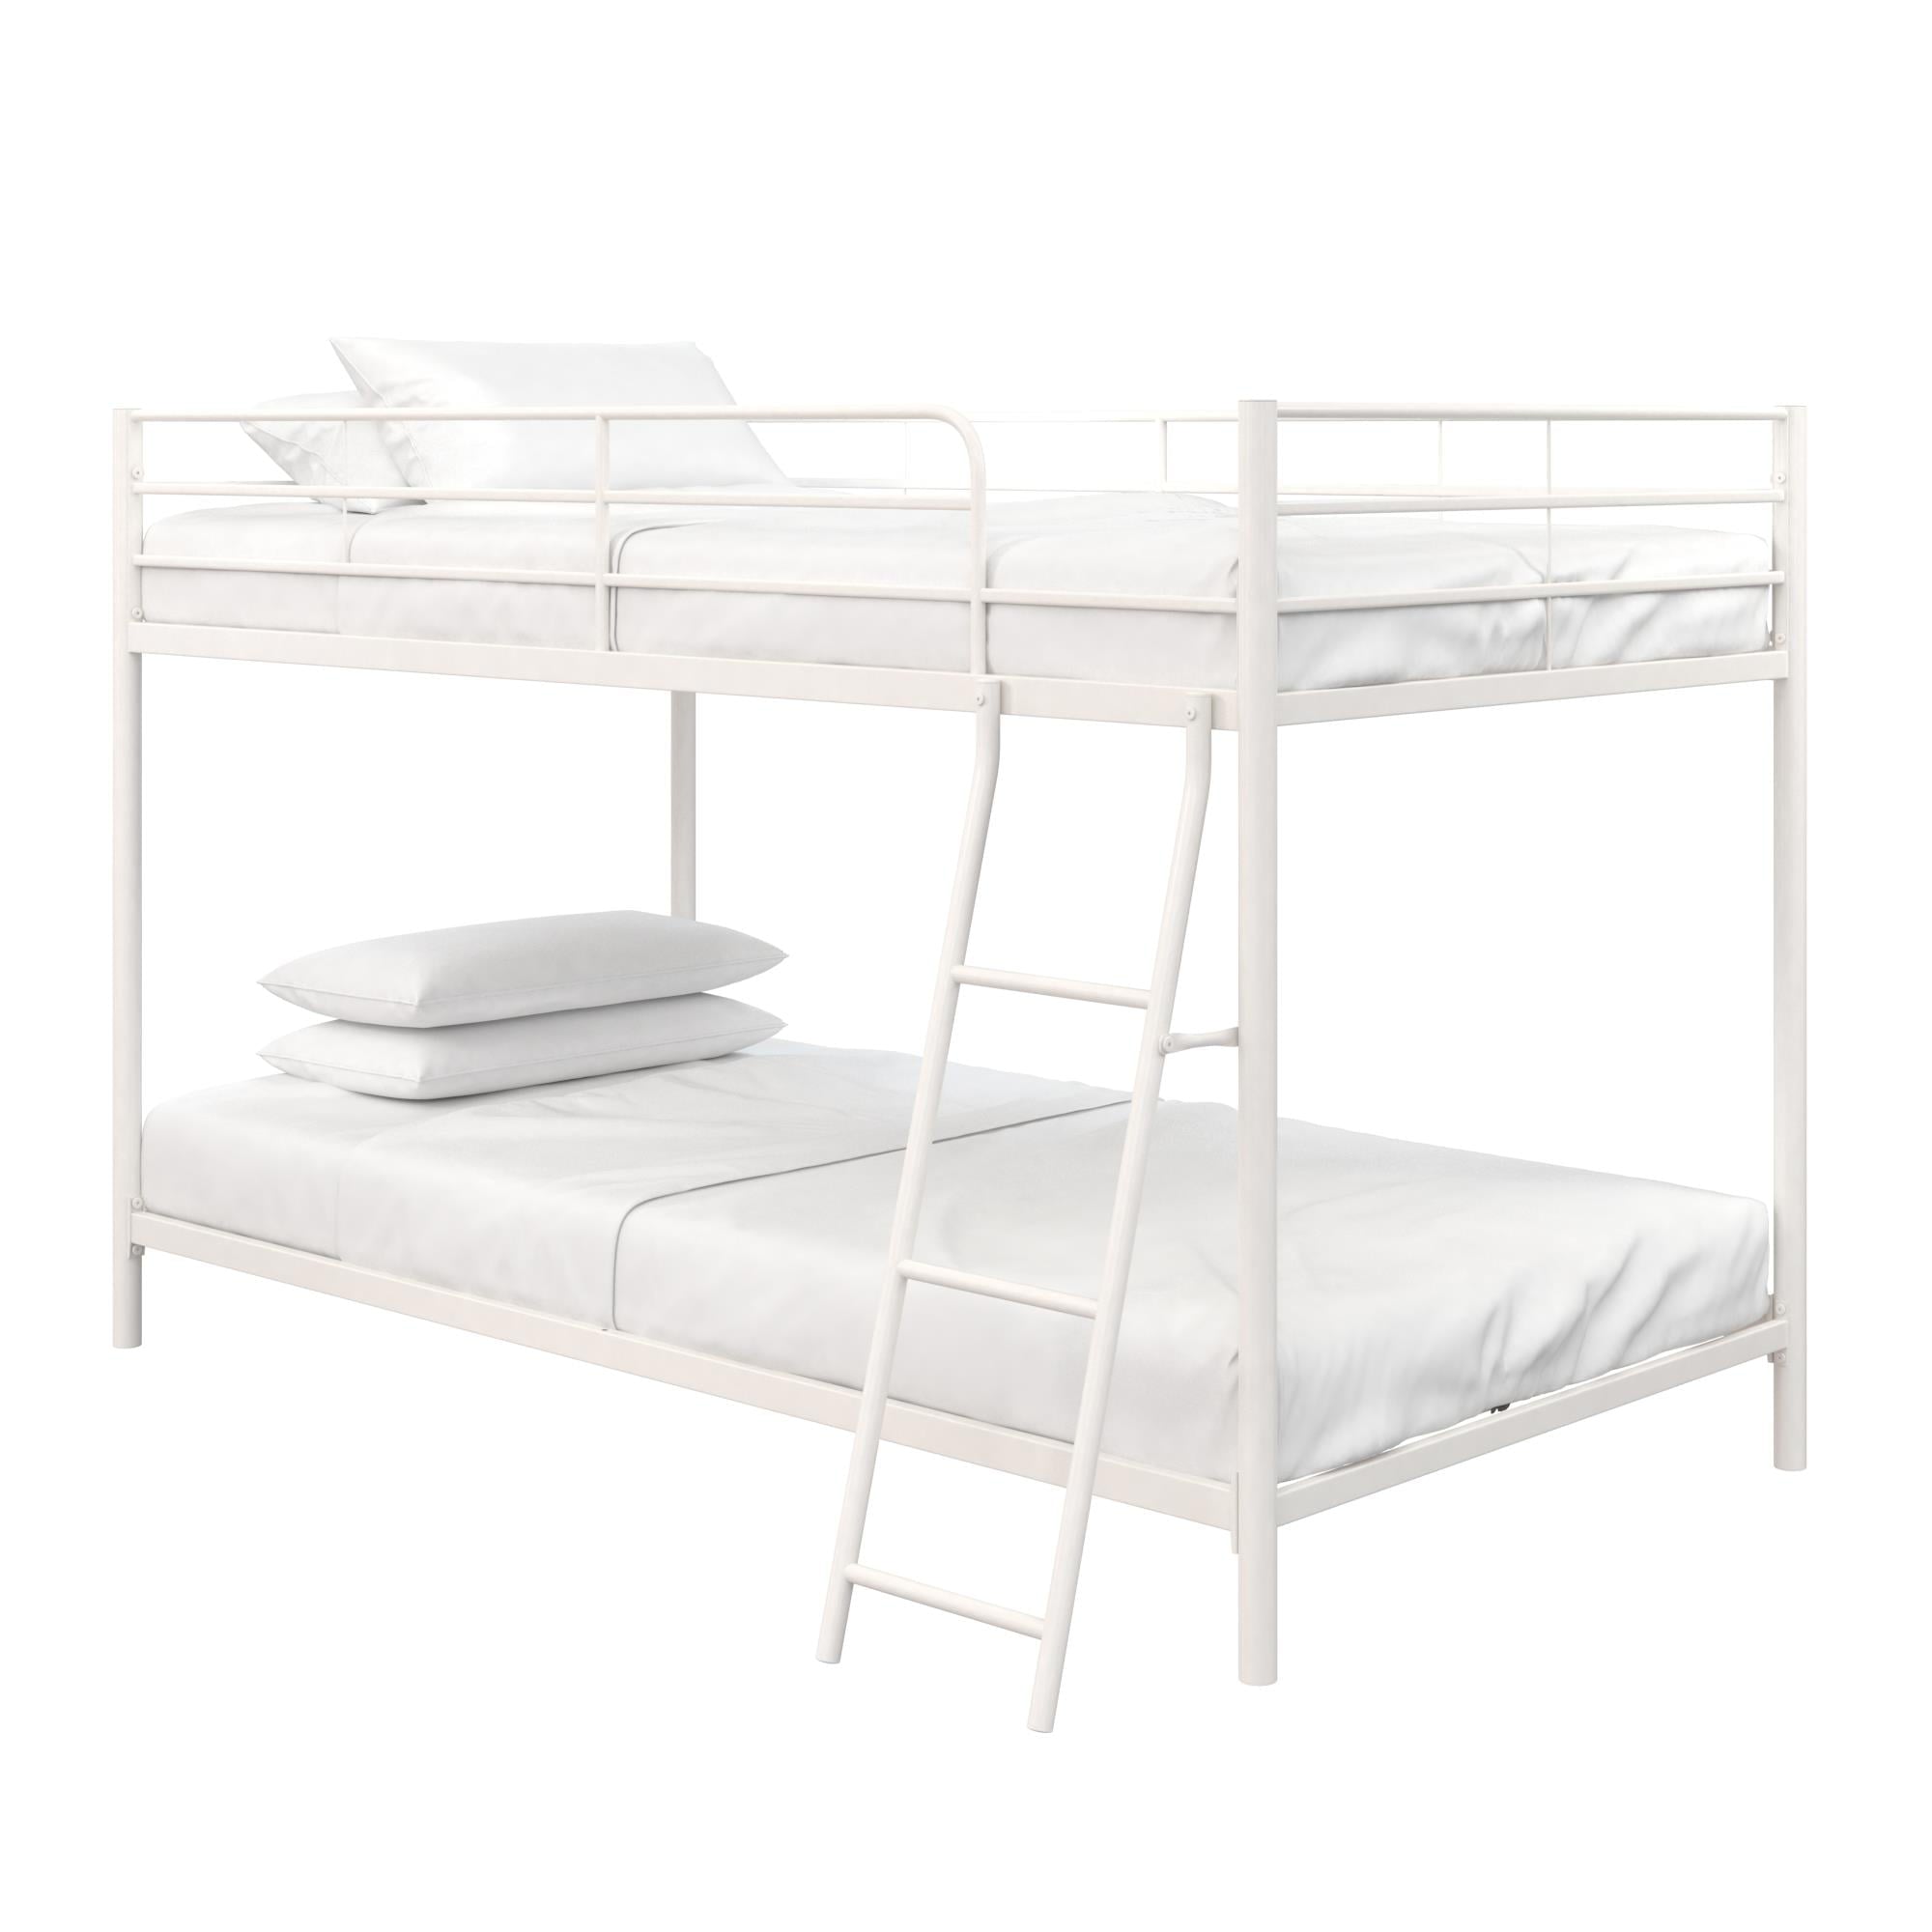 Mainstays Small Space Junior Twin over Twin Metal Bunk Bed, Off White